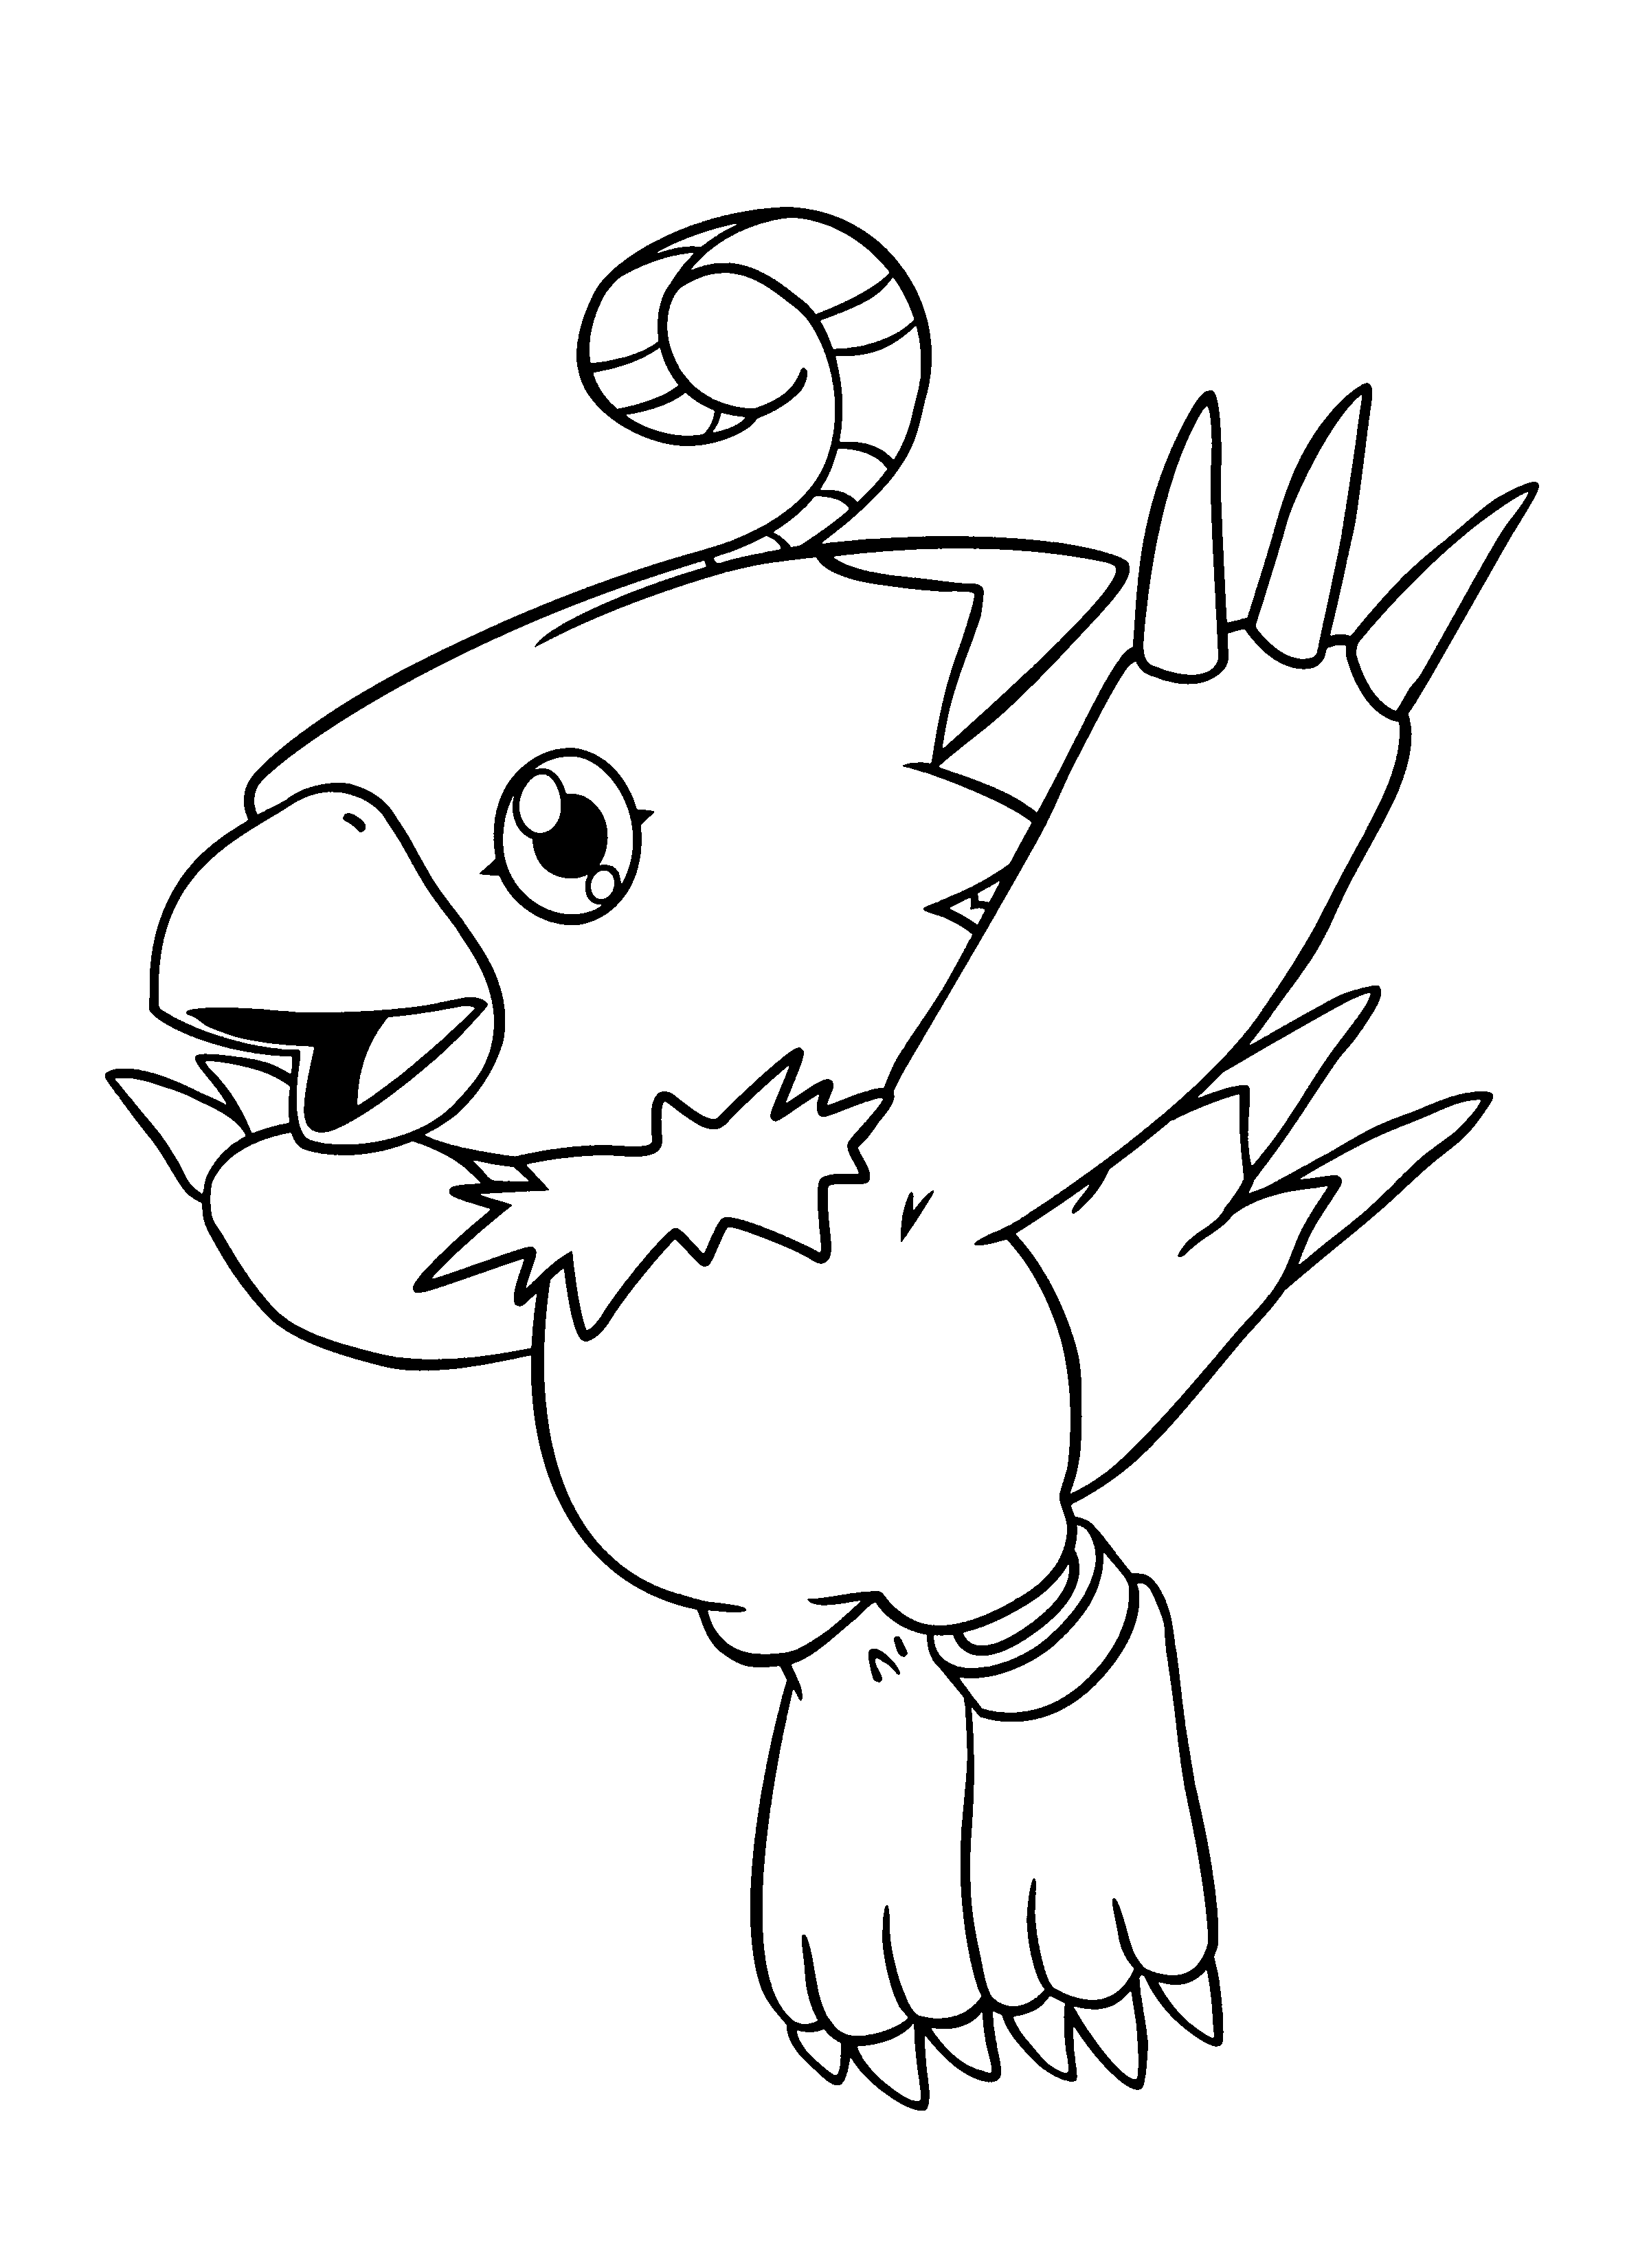 digimon-coloring-page-0072-q1